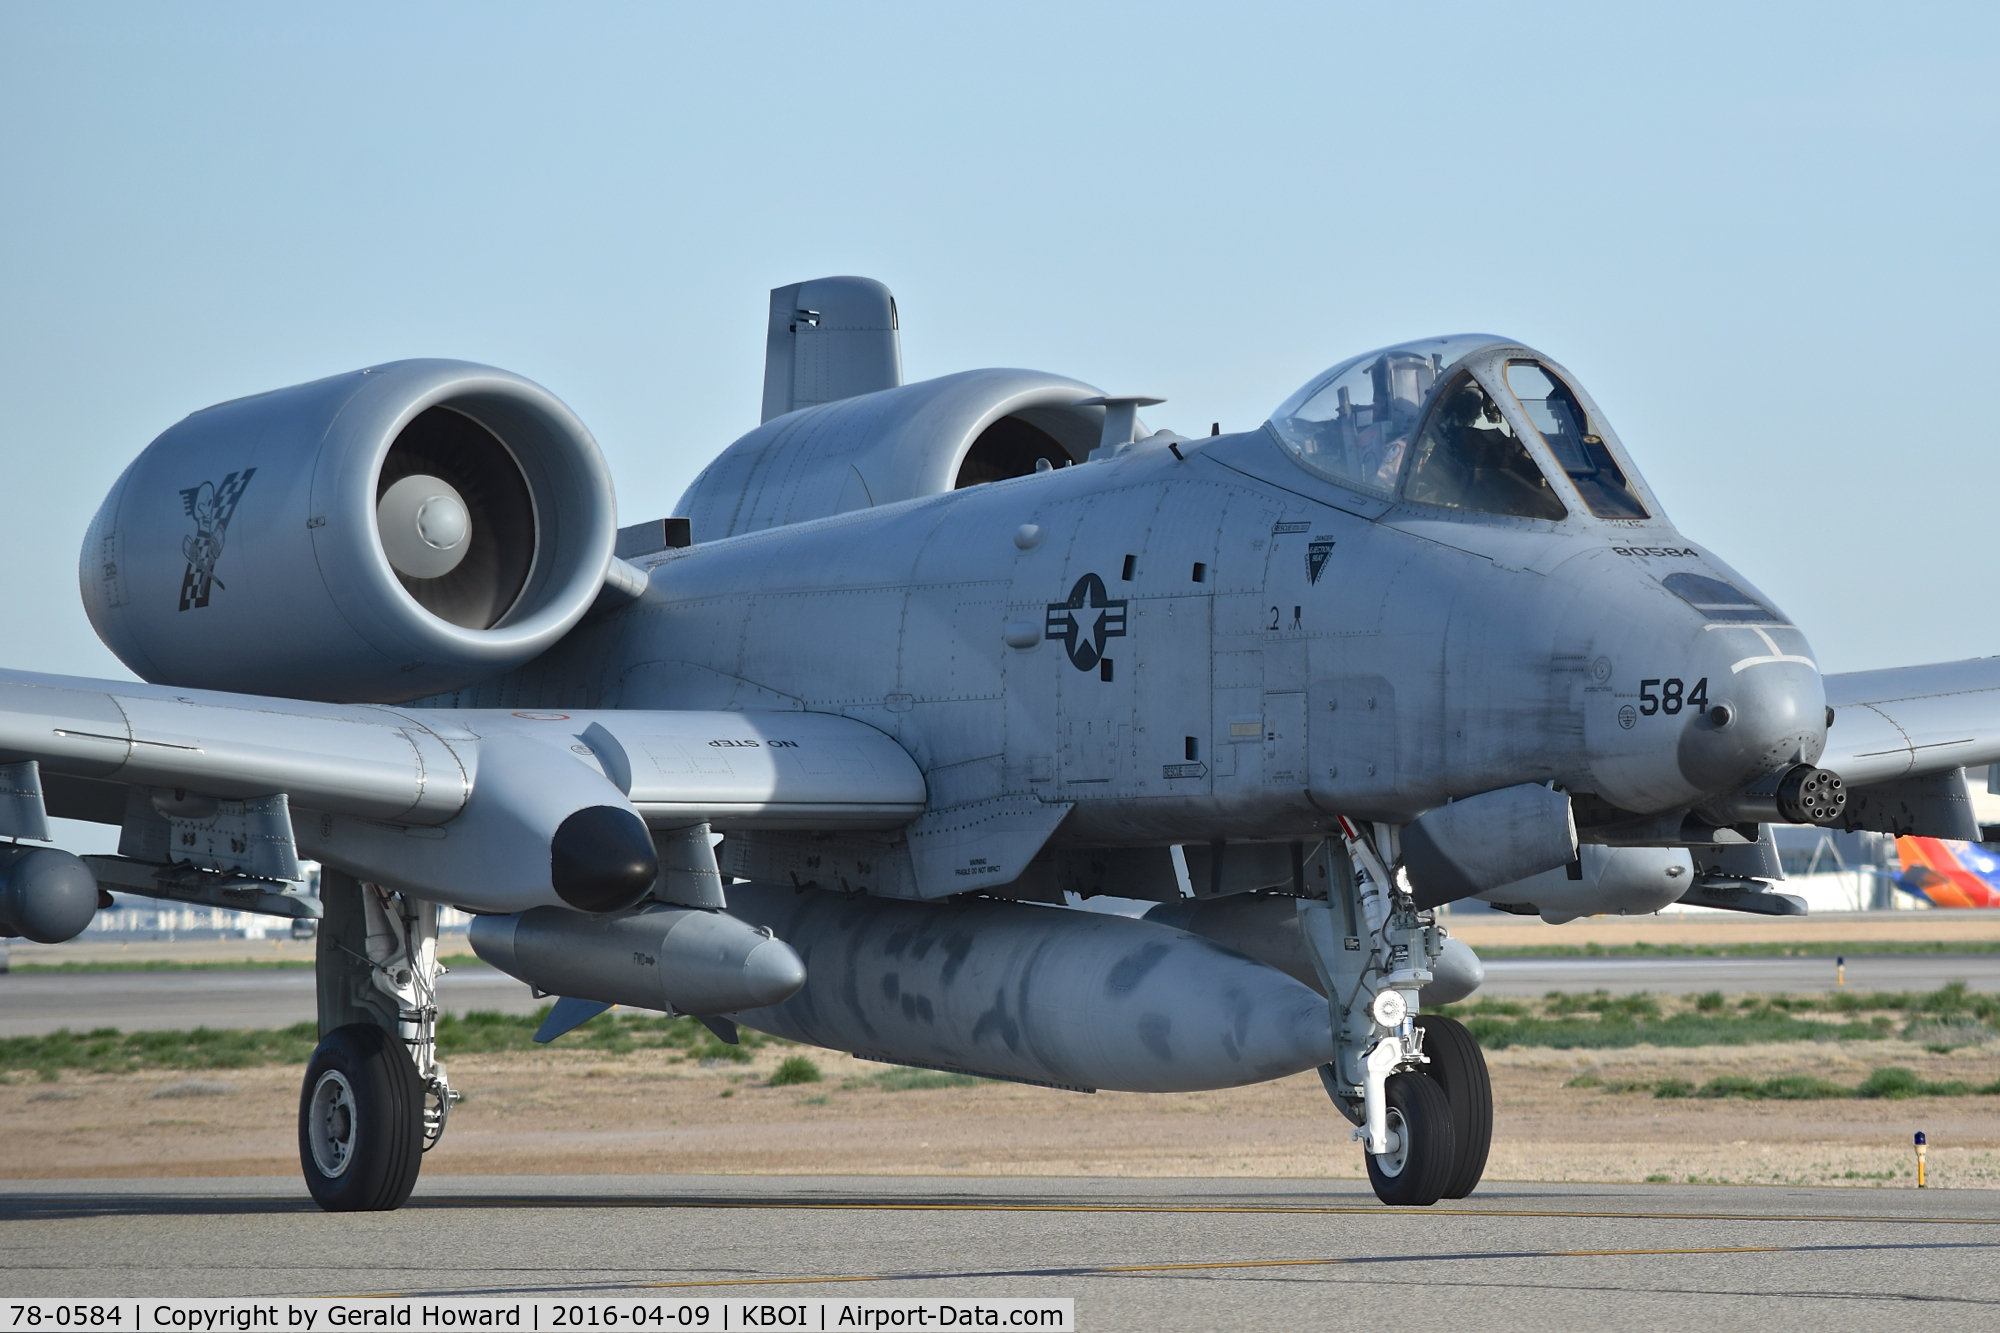 78-0584, 1978 Fairchild Republic A-10C Thunderbolt II C/N A10-0204, On Taxiway Bravo. Deploying for 6 months to Middle East. 190th Fighter Sq., 124th Fighter Wing, Idaho ANG.